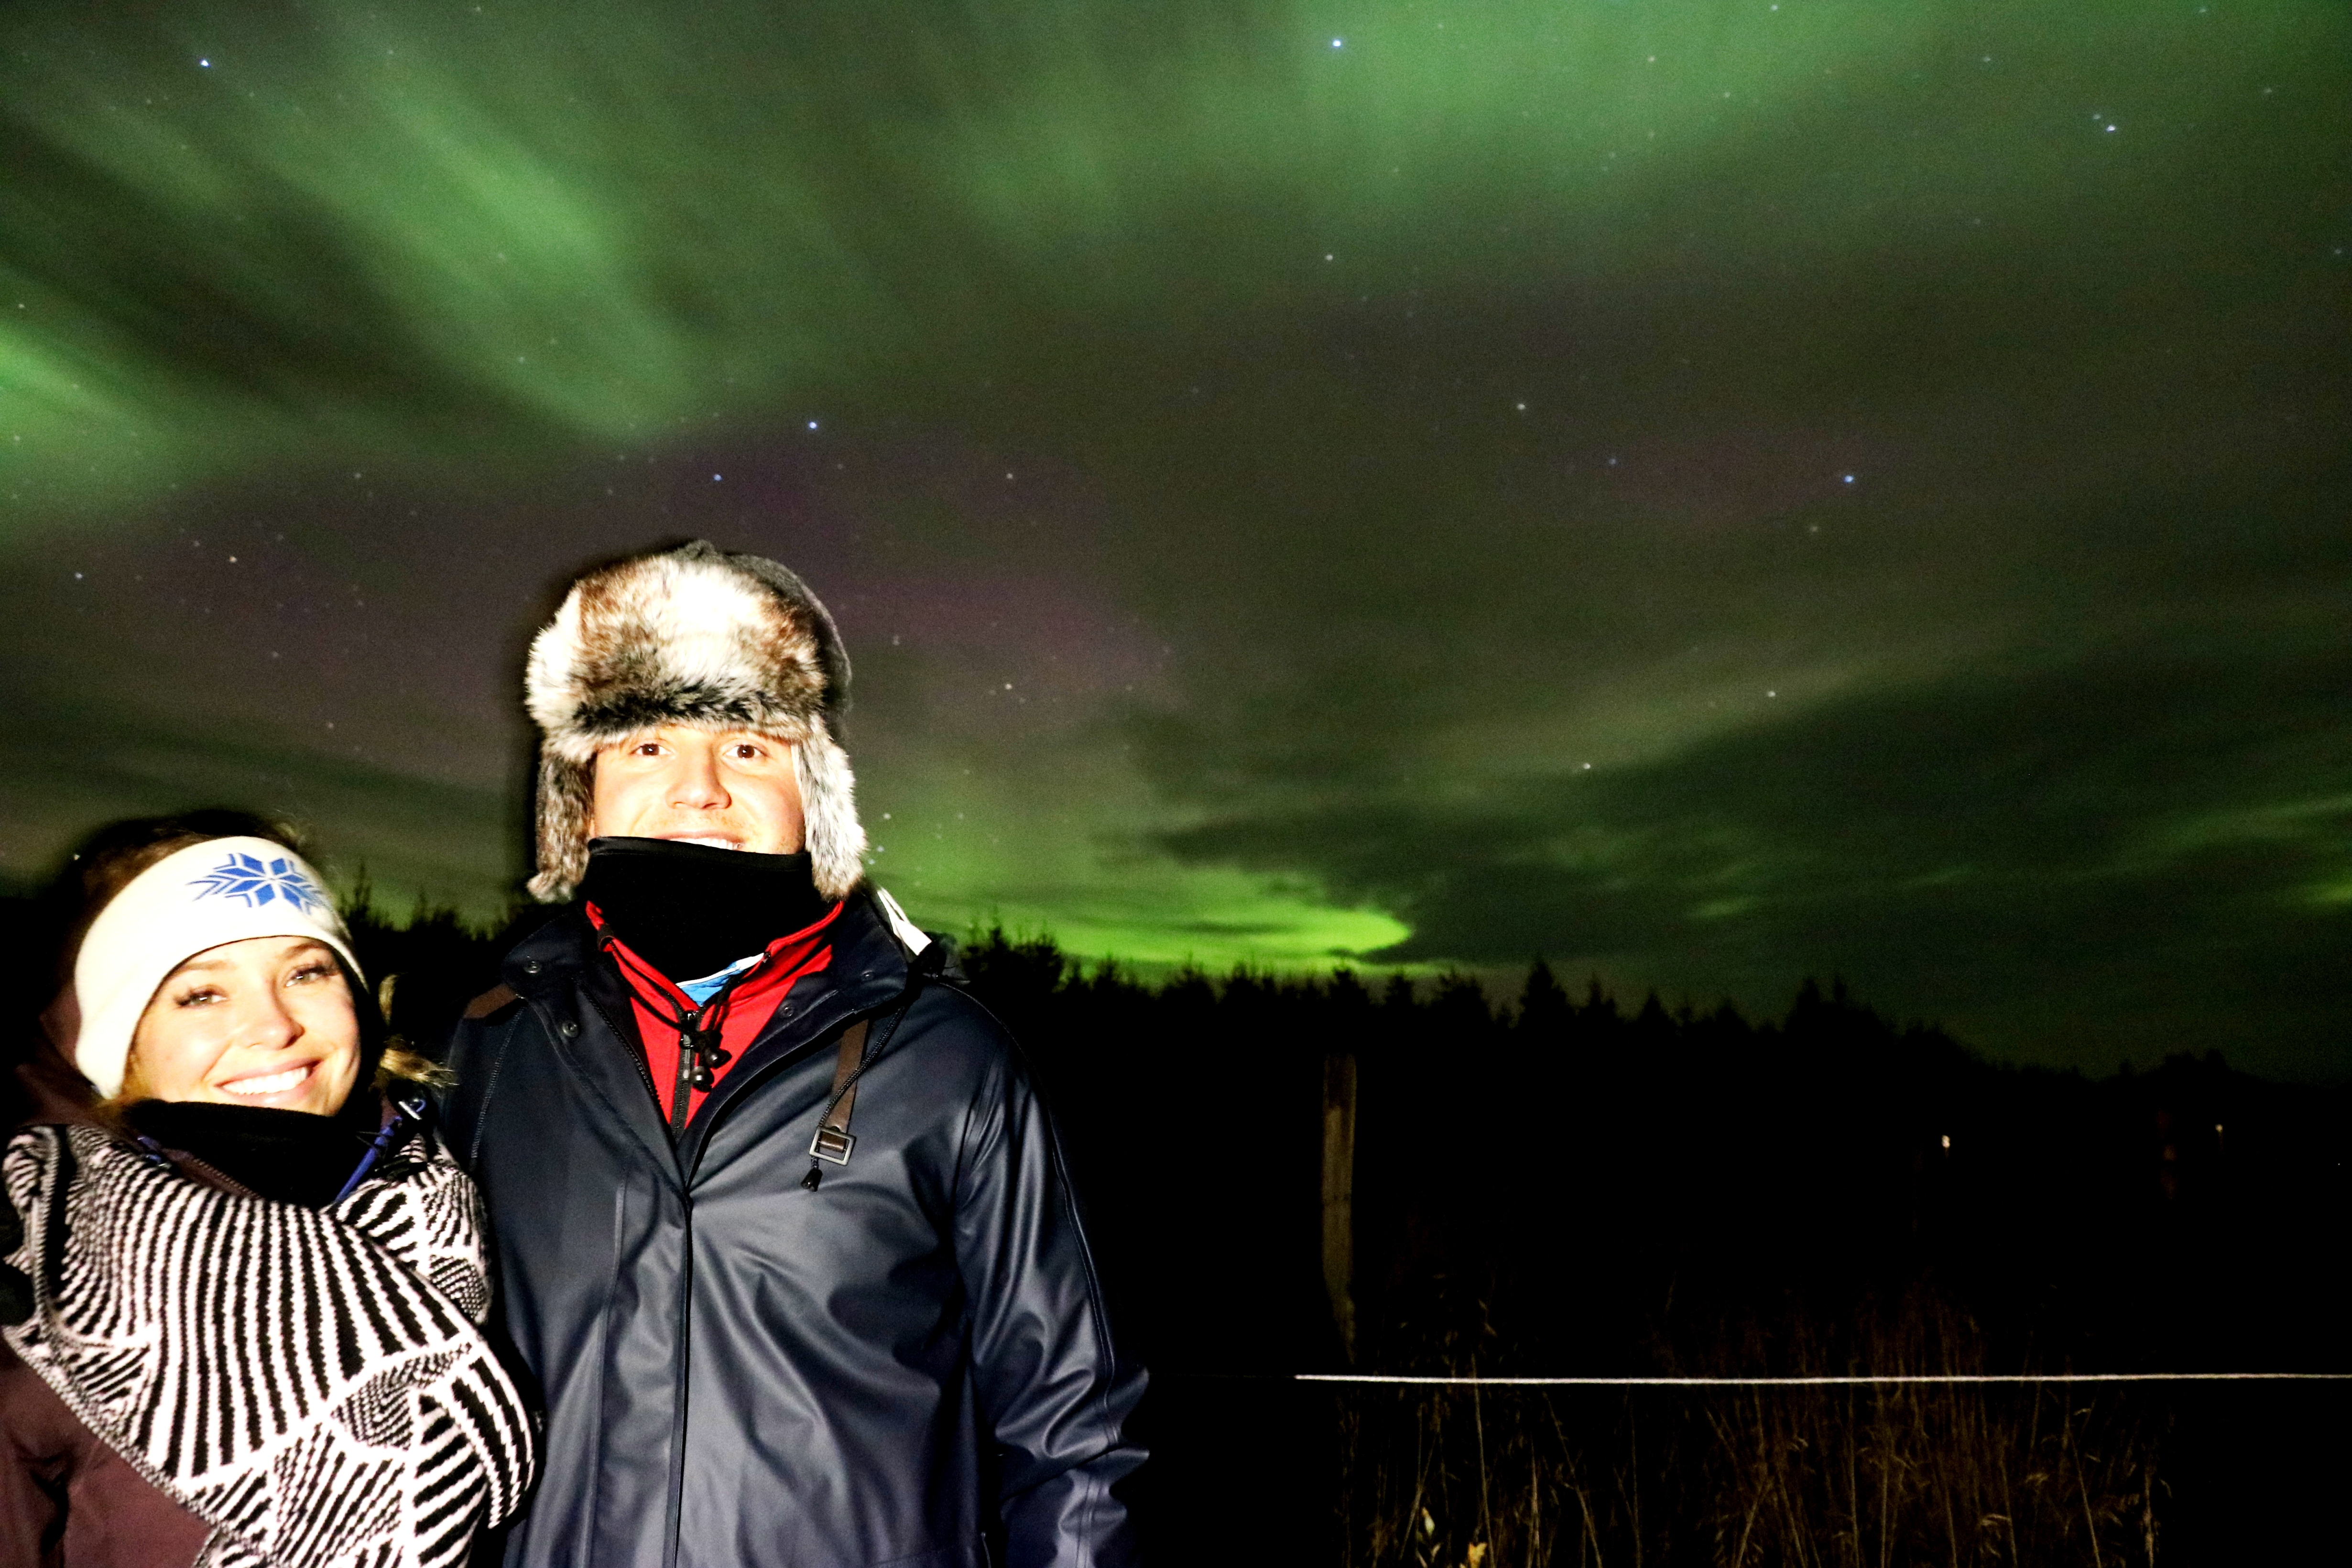 A couple enjoy the Northern Lights in North Iceland.